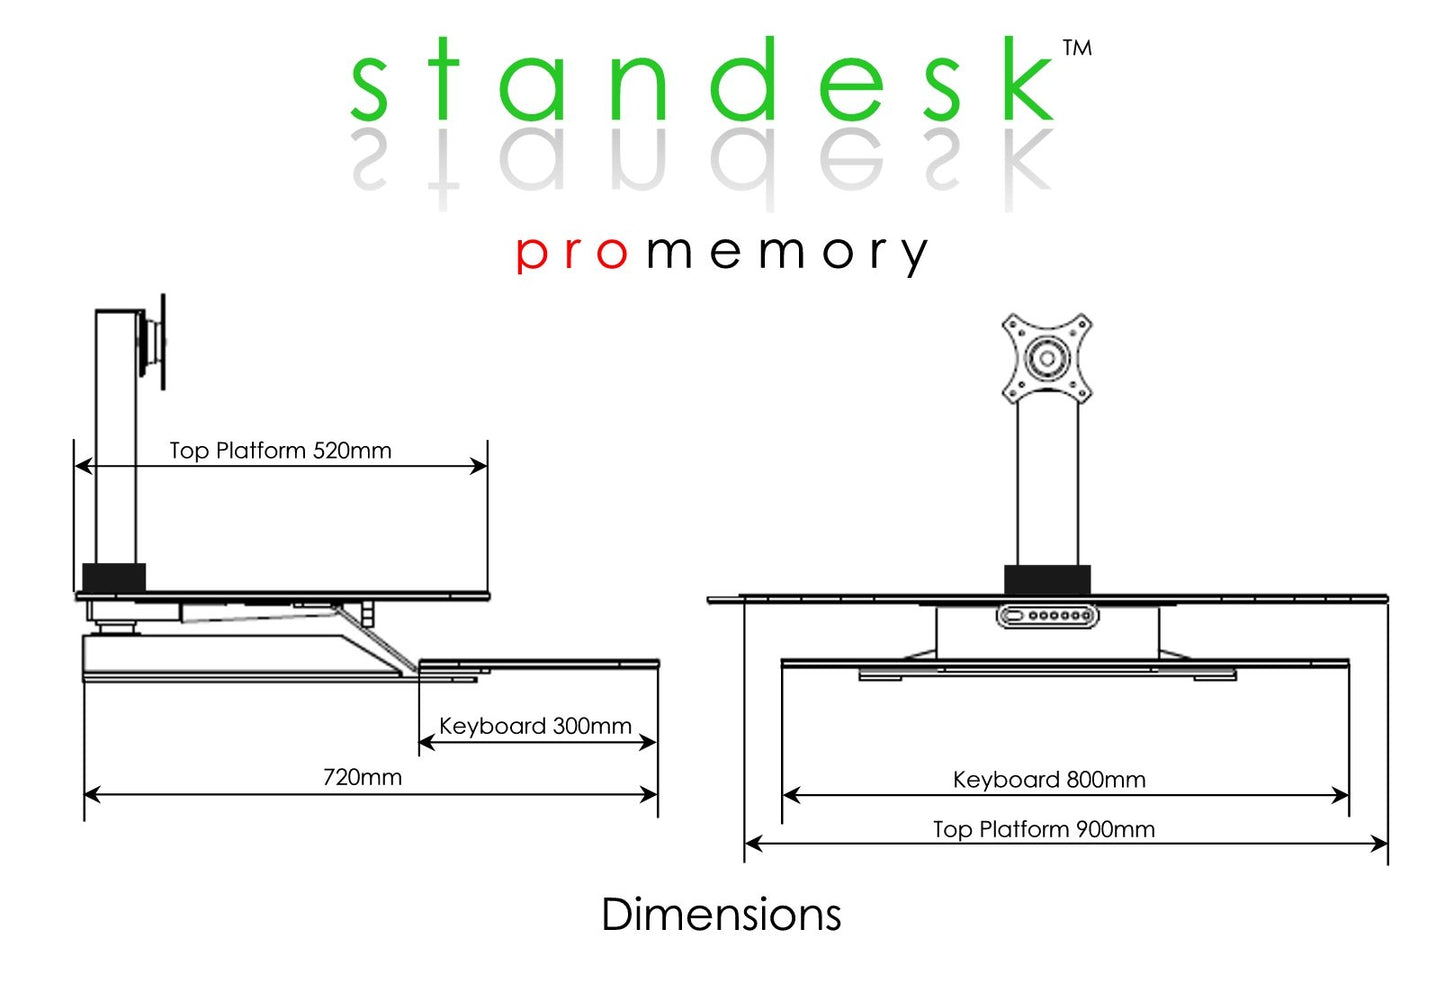 Buy Standesk Pro Memory Desk Converter workstation/desktop risers with FREE SHIPPING dimensions